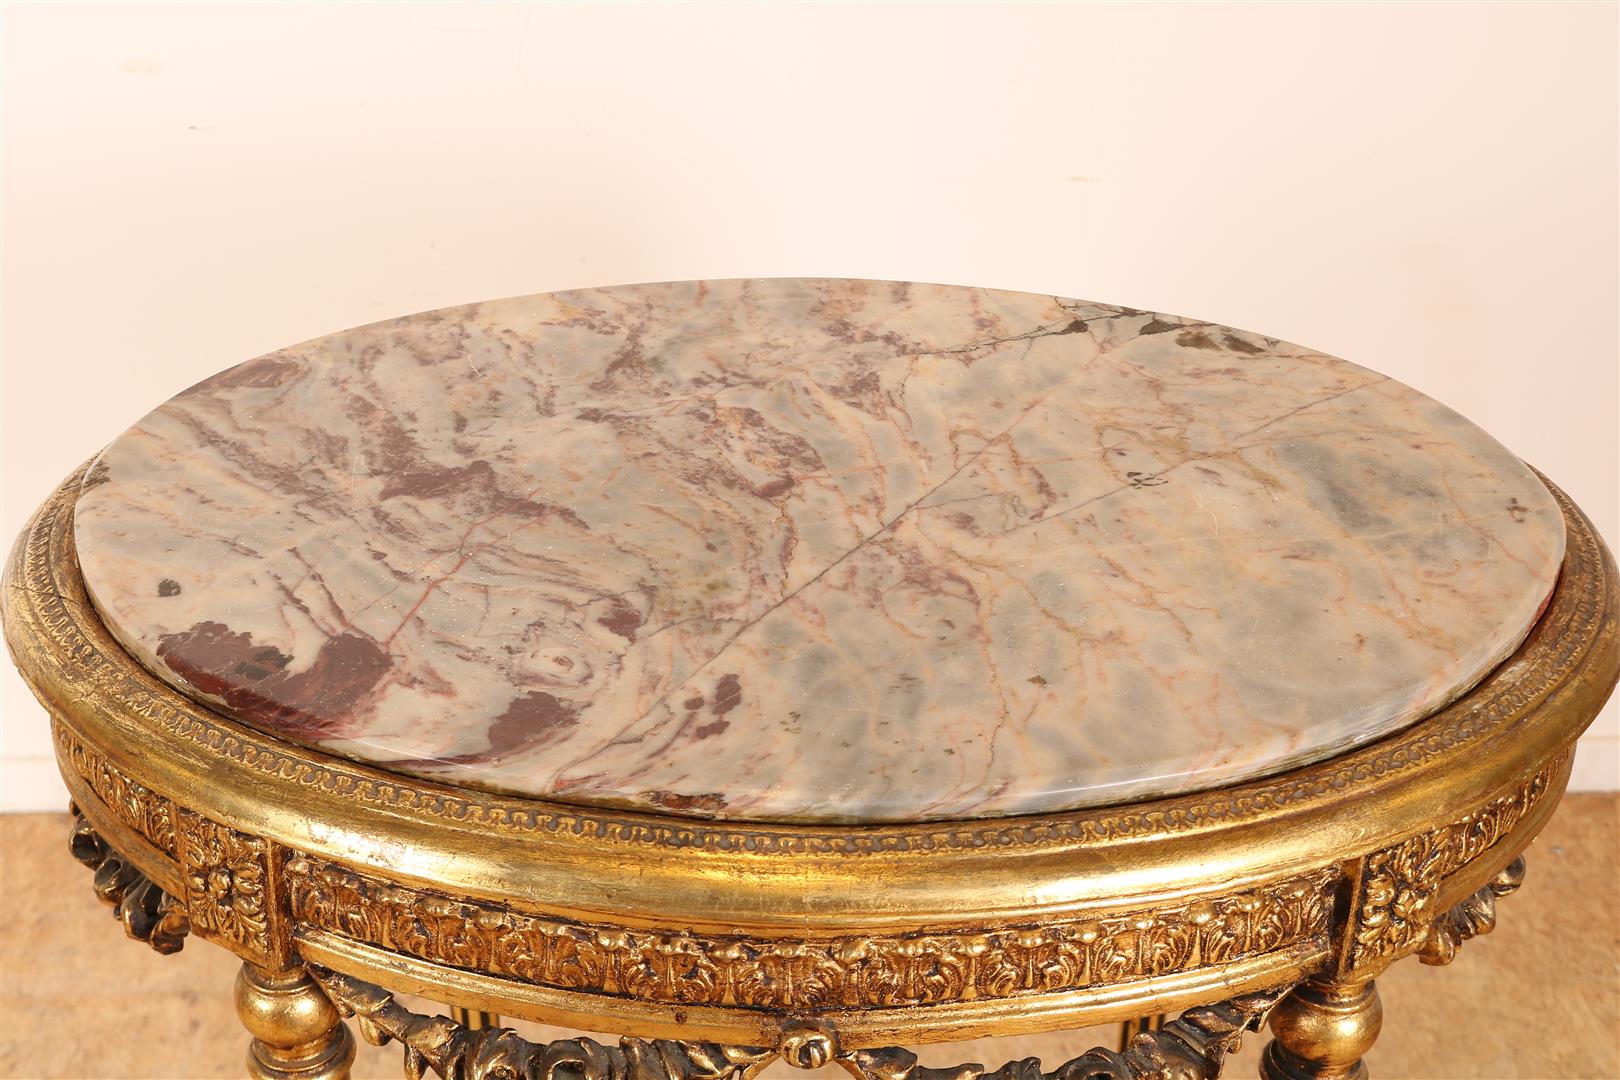 Gilded Louis XVI style side table with marble top on fluted legs connected by rules, 82 x73 x 53 - Image 3 of 5